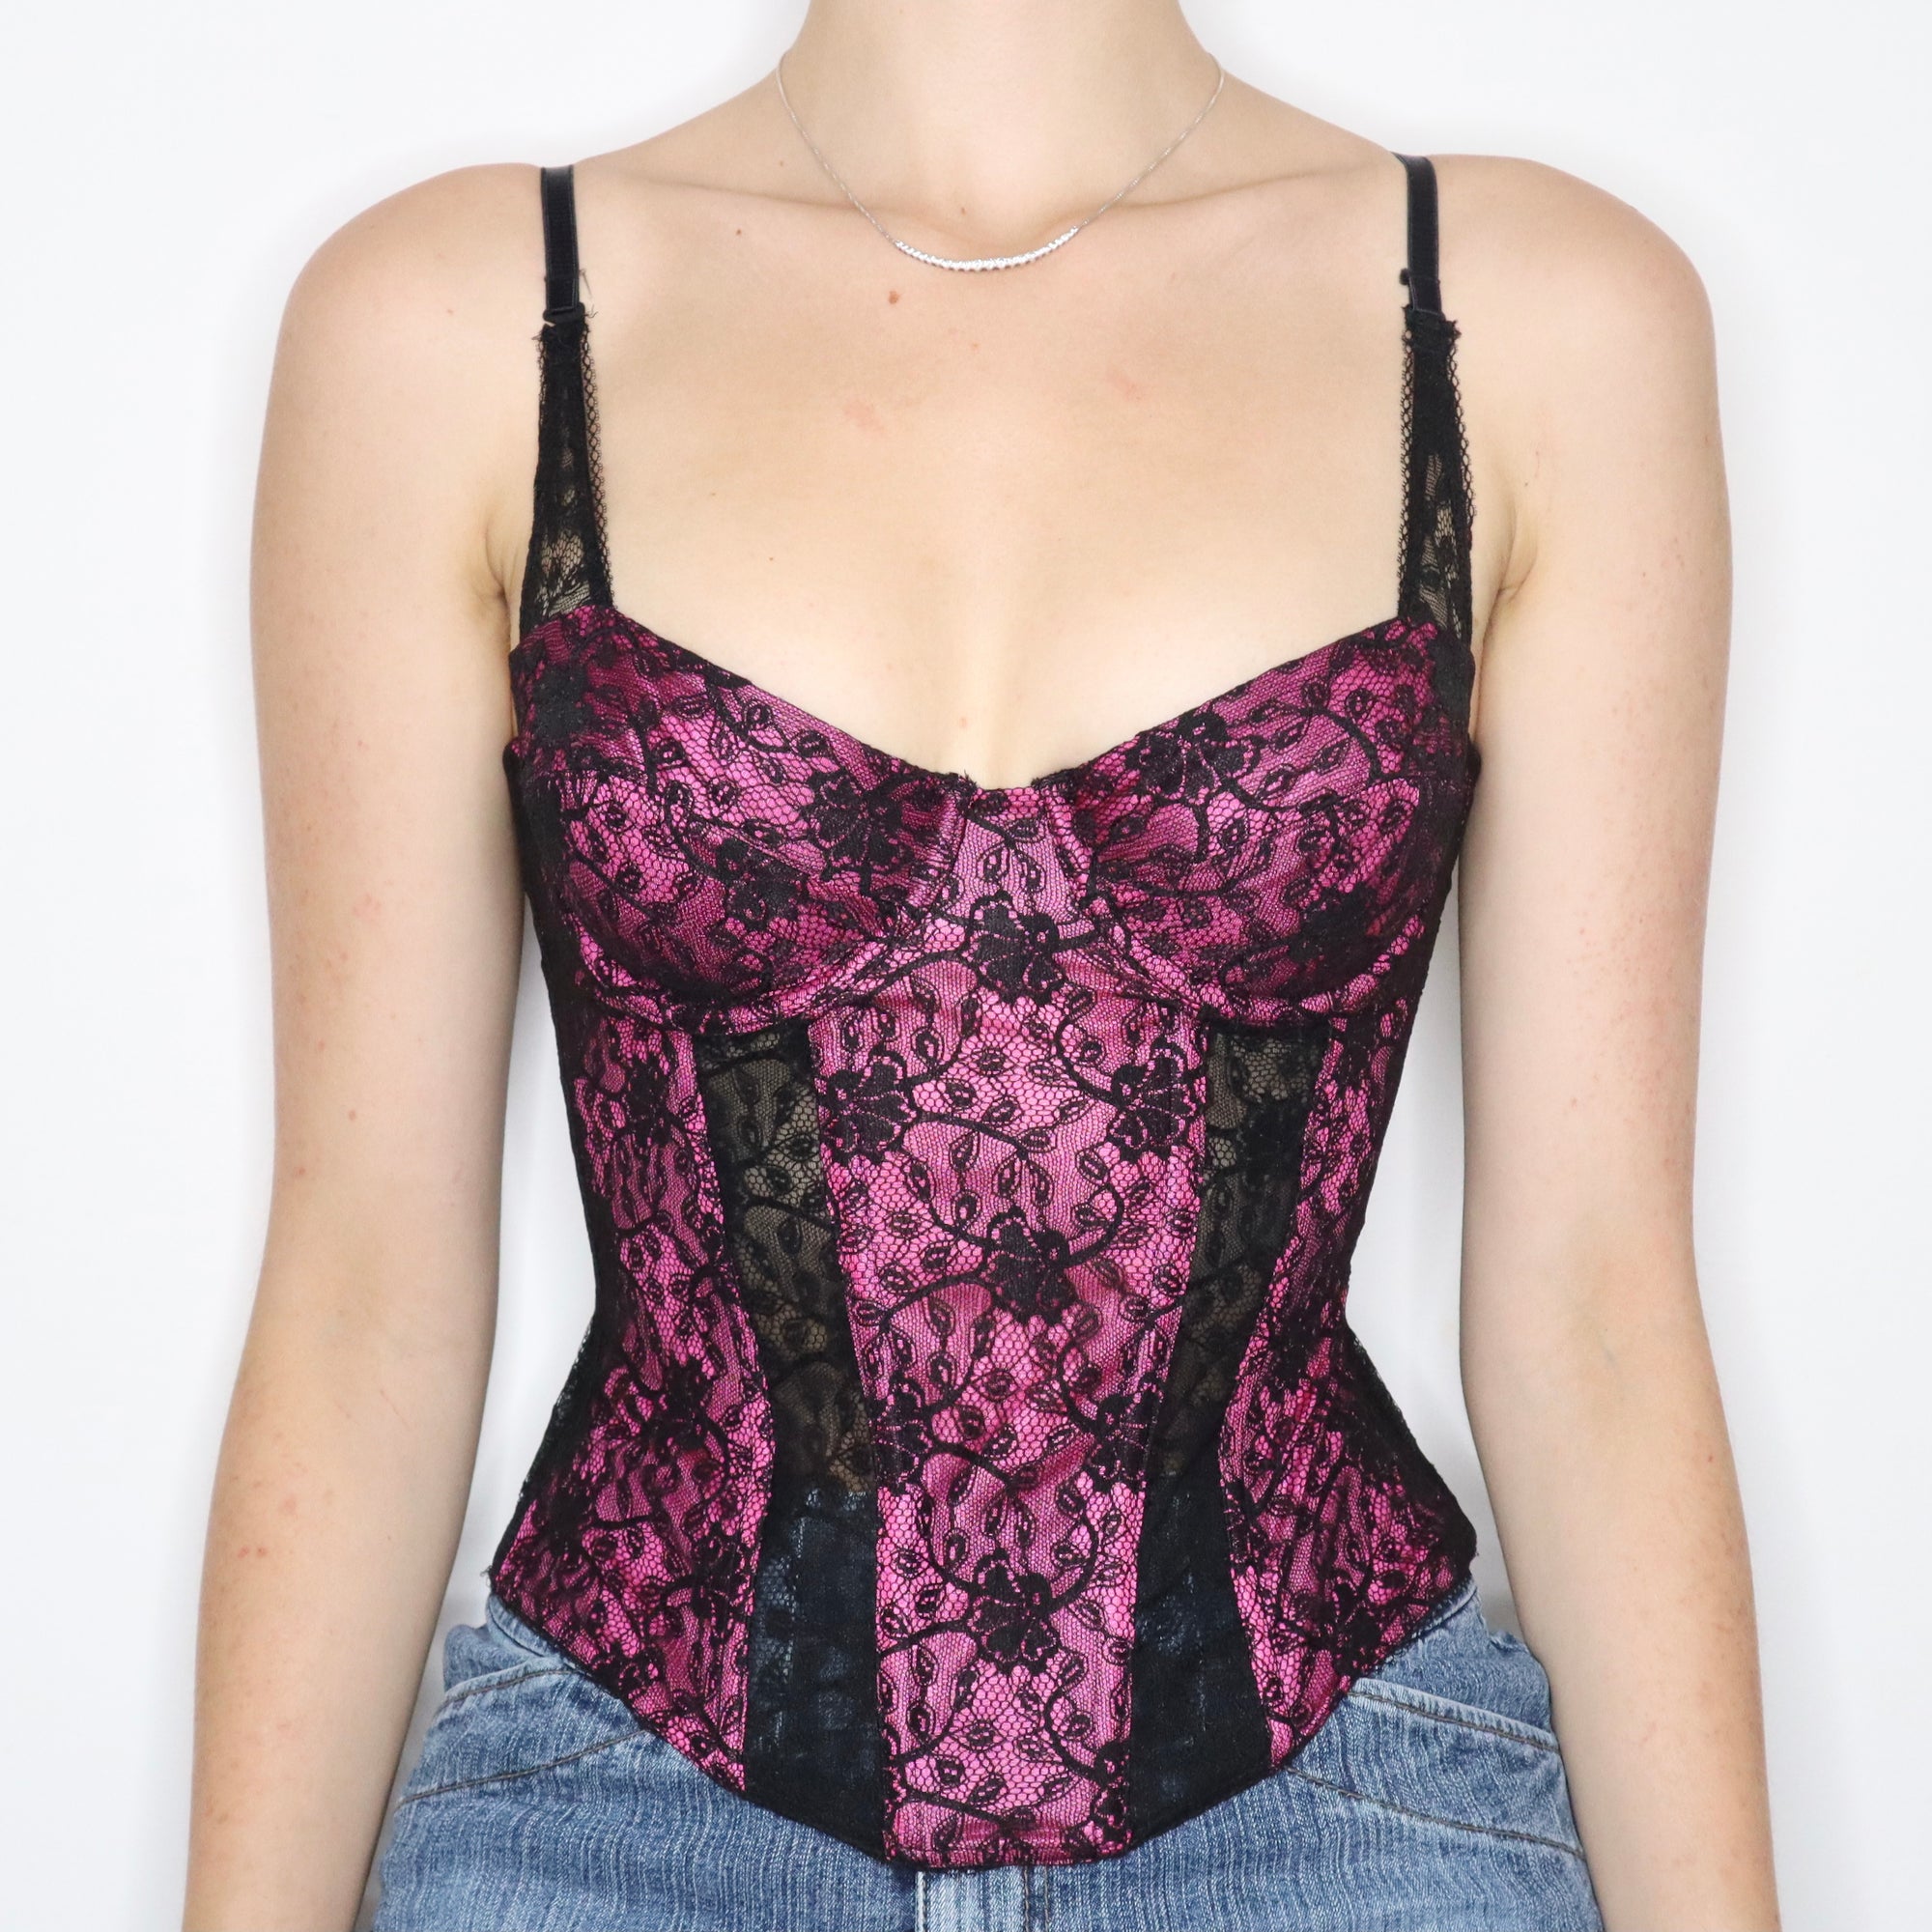 Mall Goth Lace Bustier